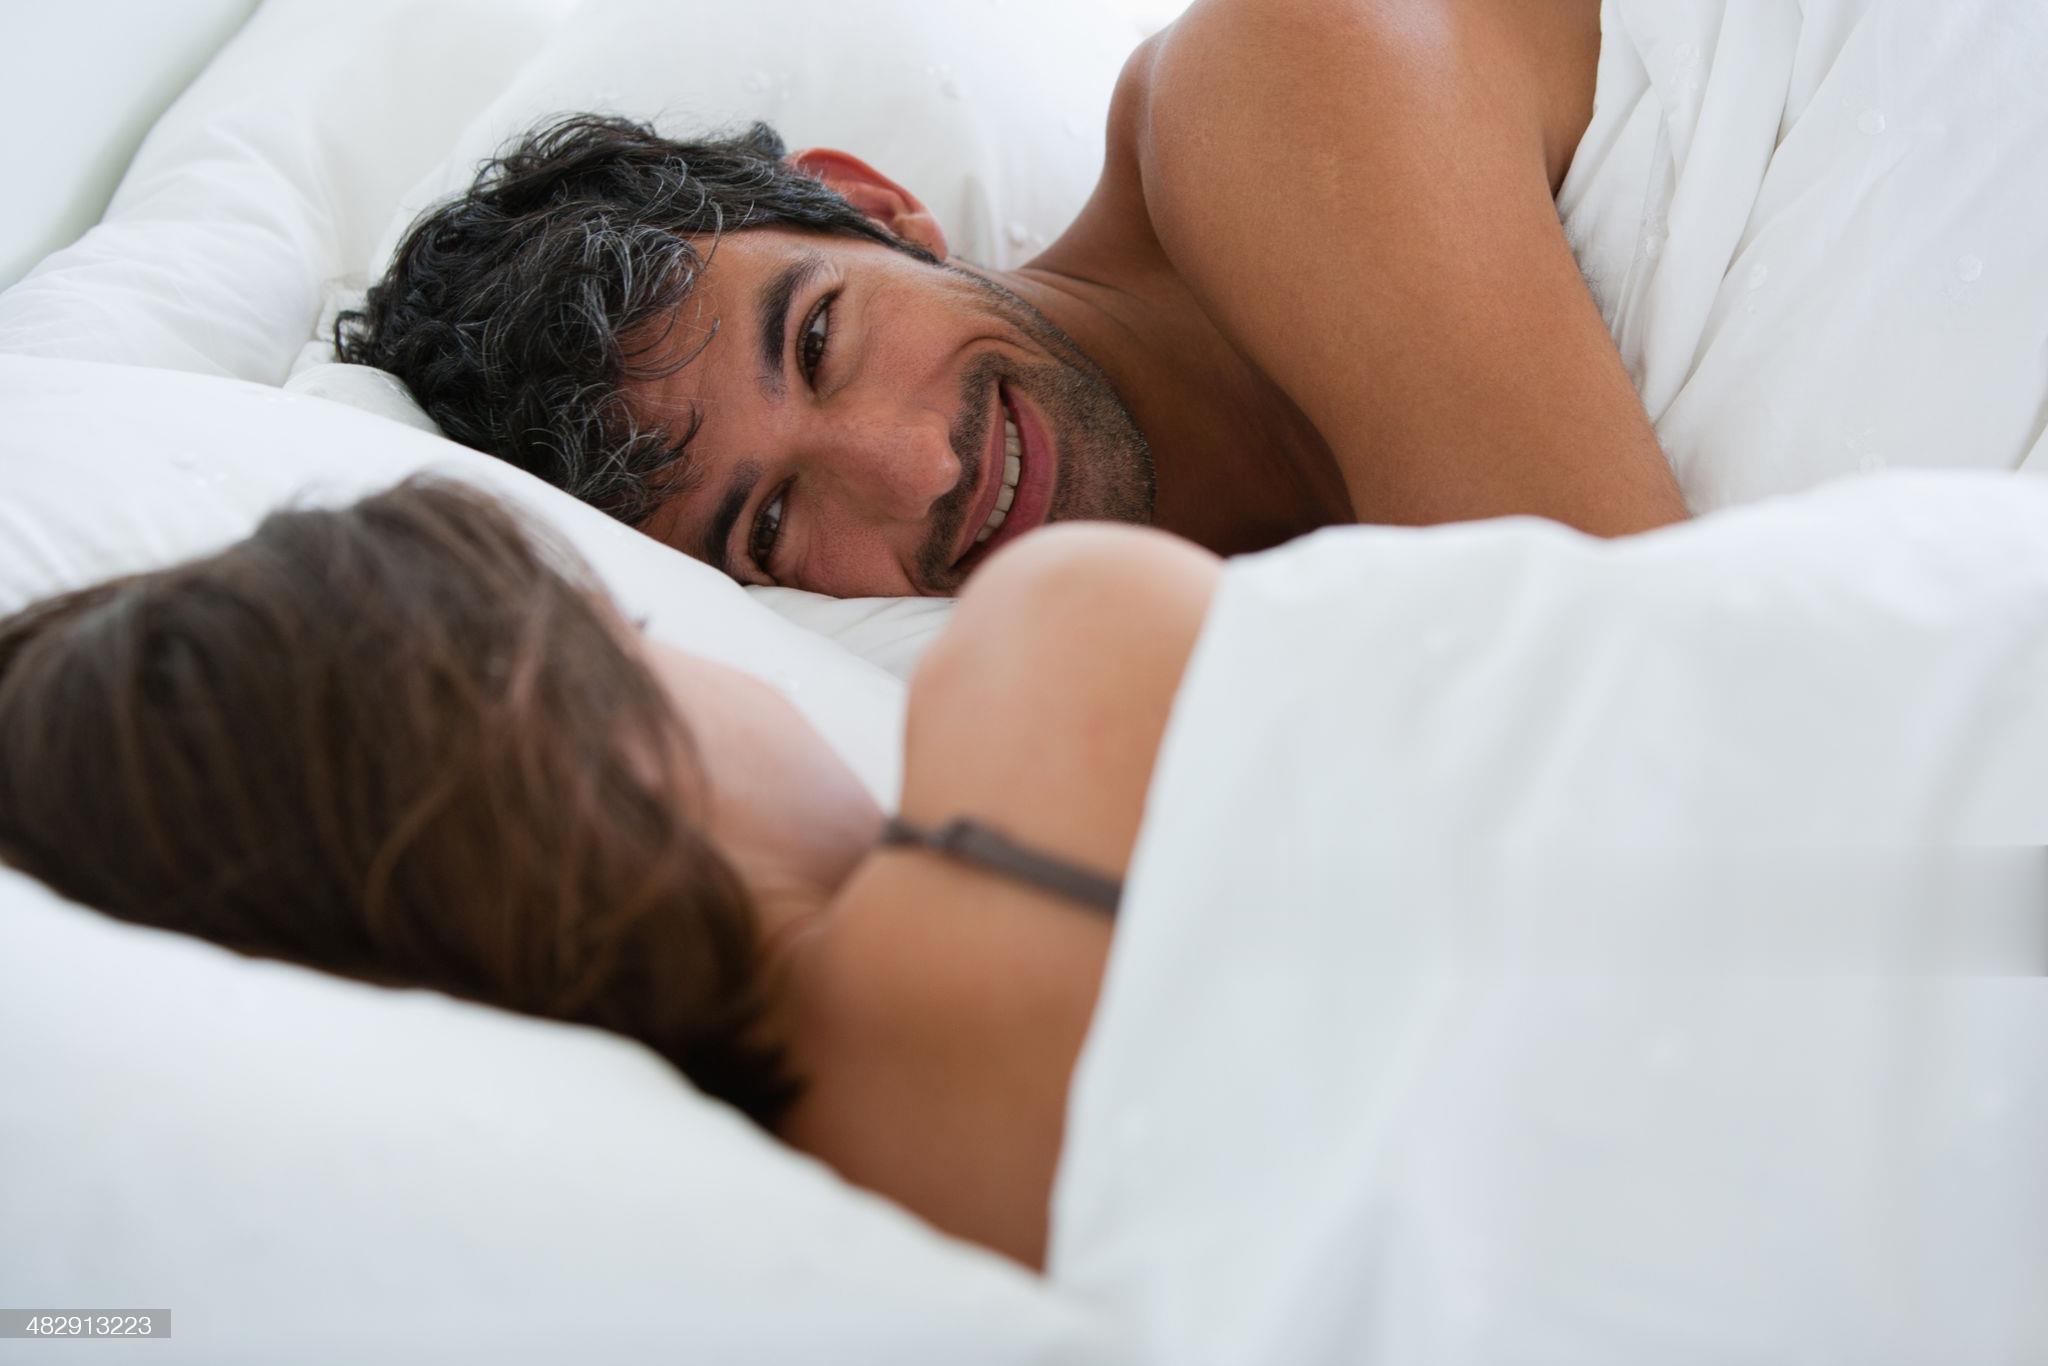 6 tips that will modify your sex life